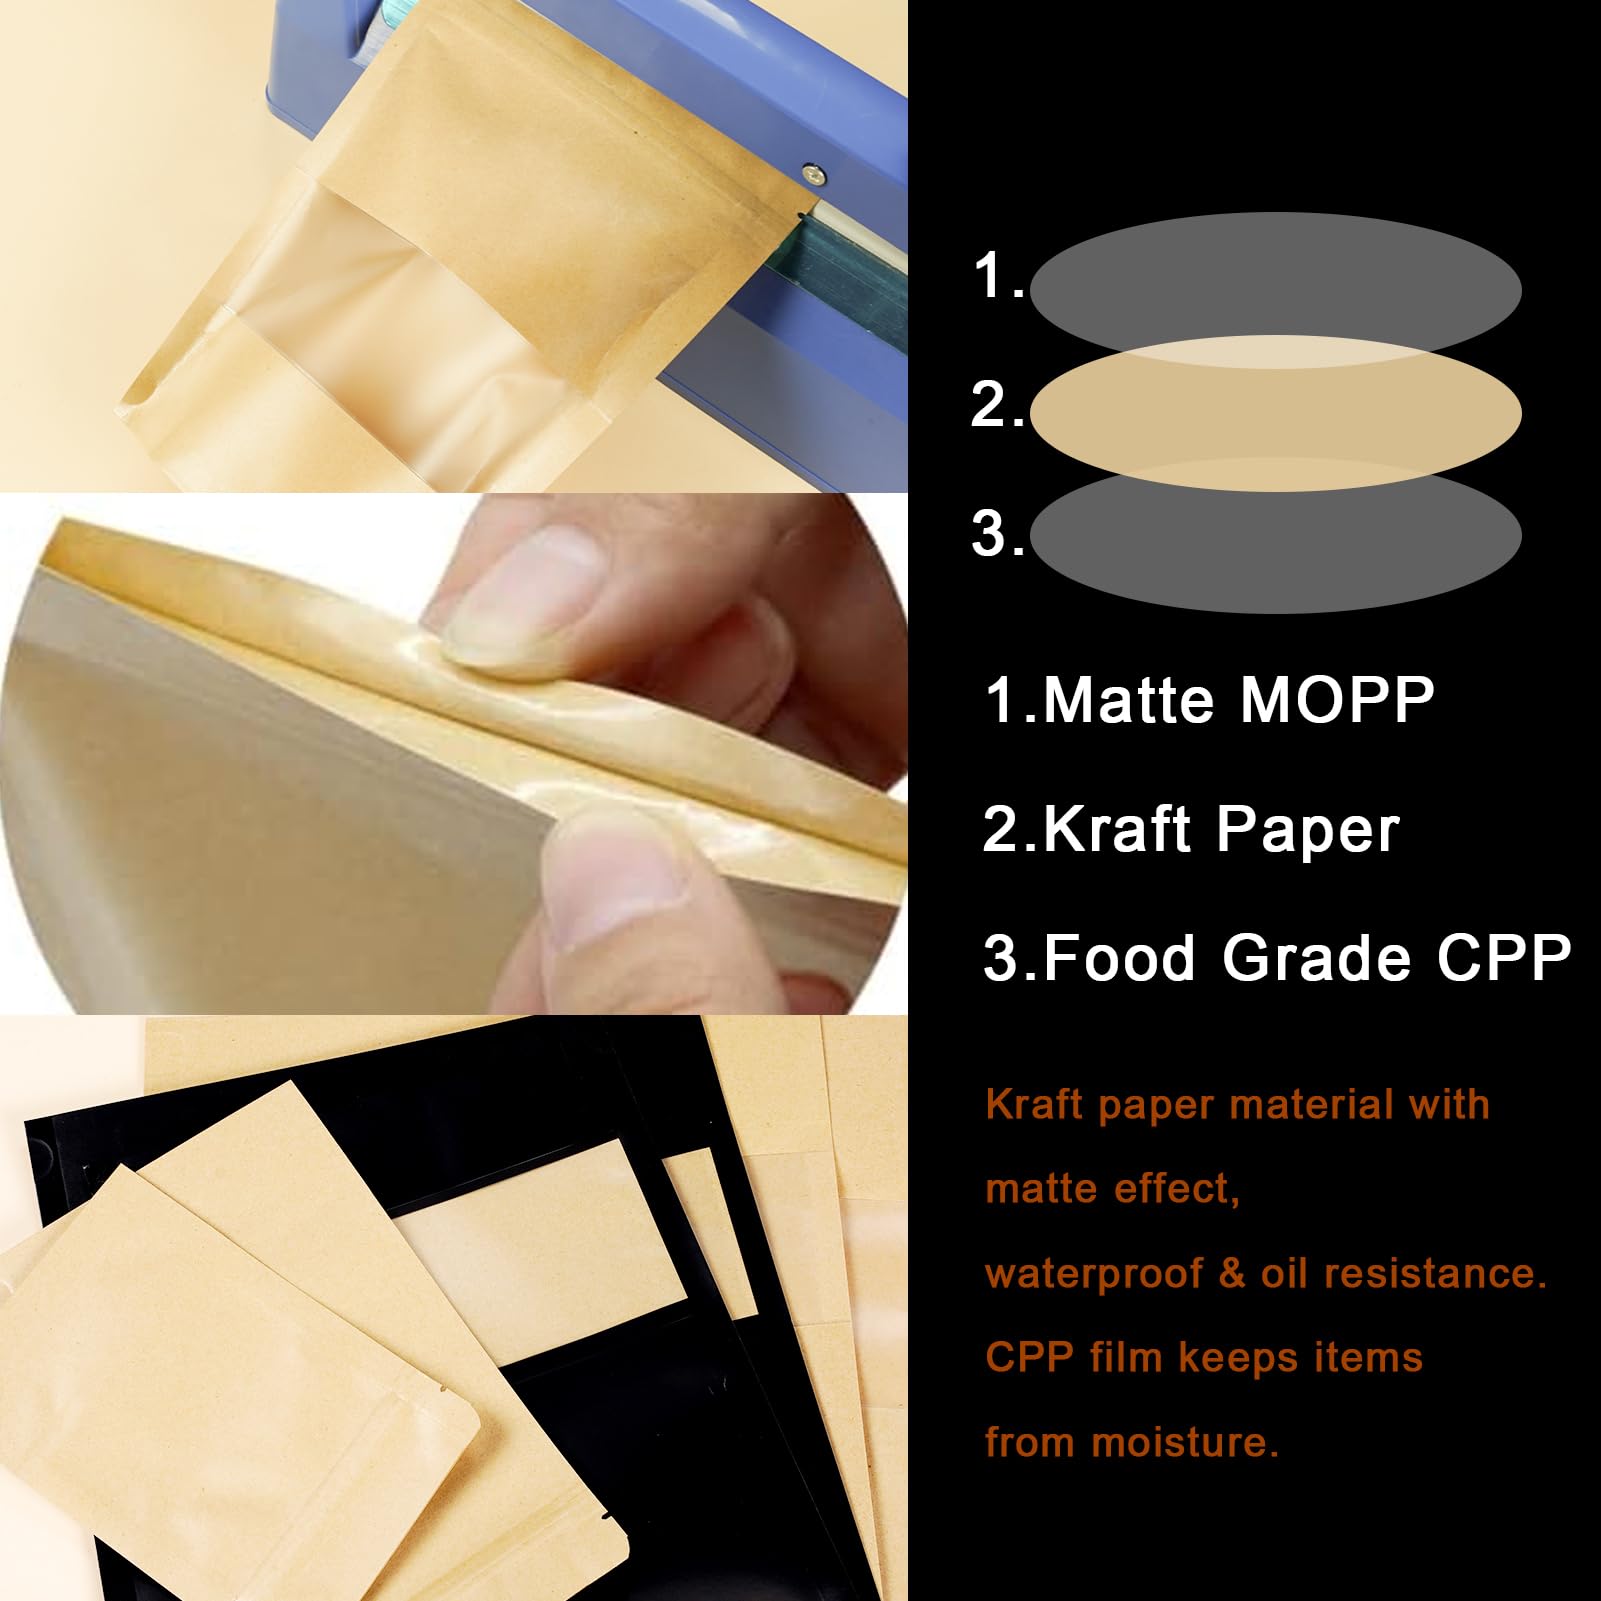 100 PCS Resealable Bags, Stand Up Kraft Paper Bags with Matte Window, Zipper Lock Food Storage Bags for Small Business and Home, 3.54 * 5.51 Inches Reusable Sealable Bags for Packaging